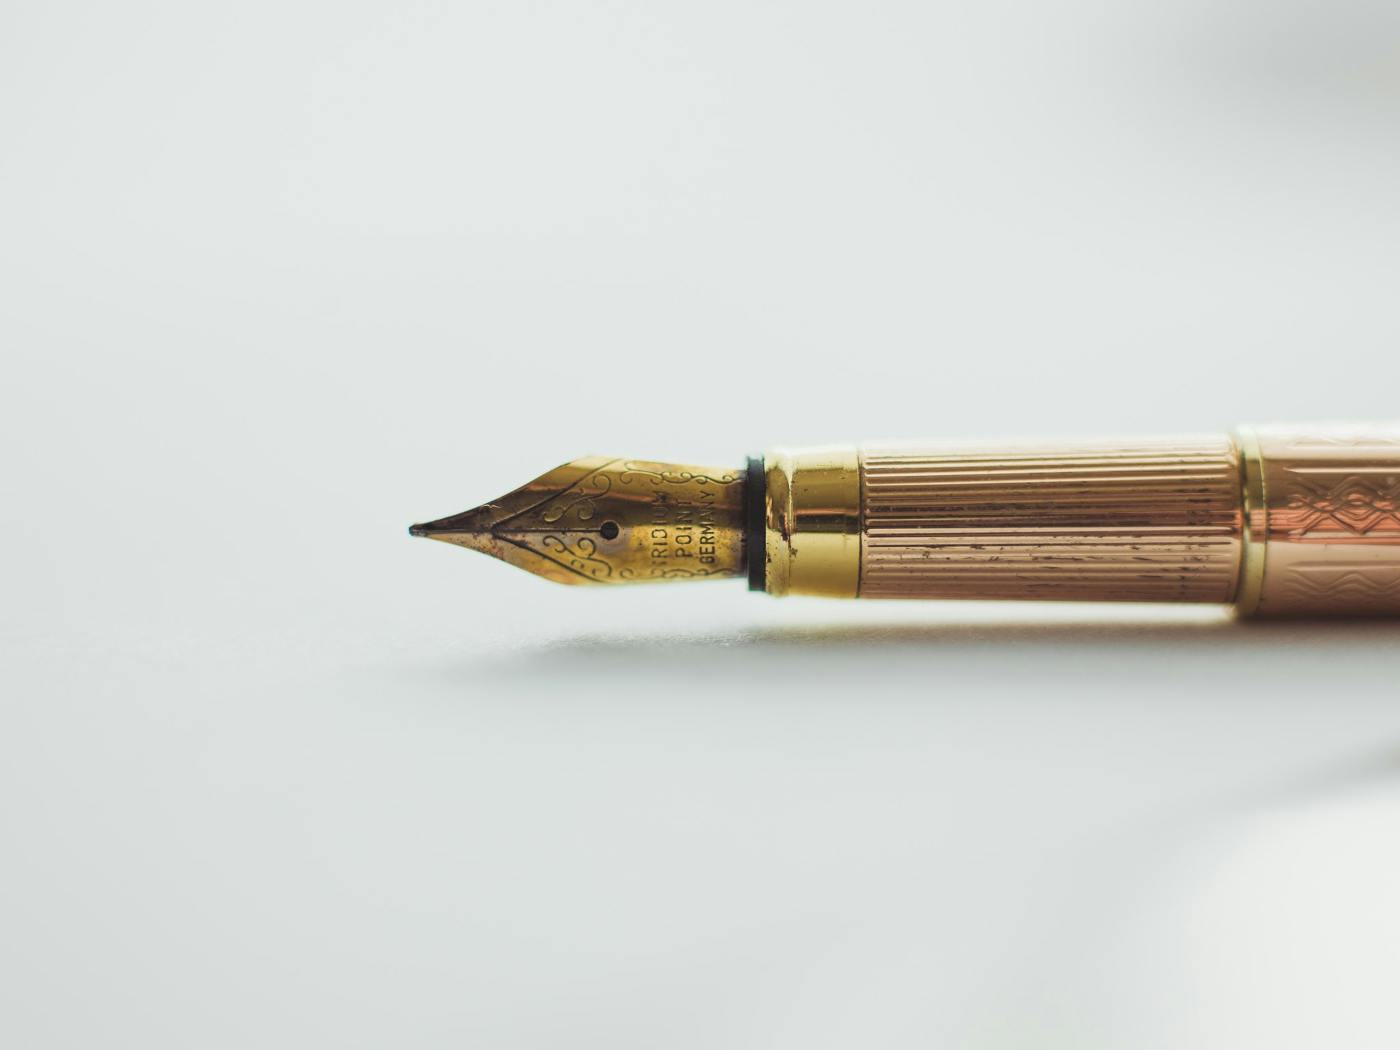 A fountain pen with a gold nib laying on its side